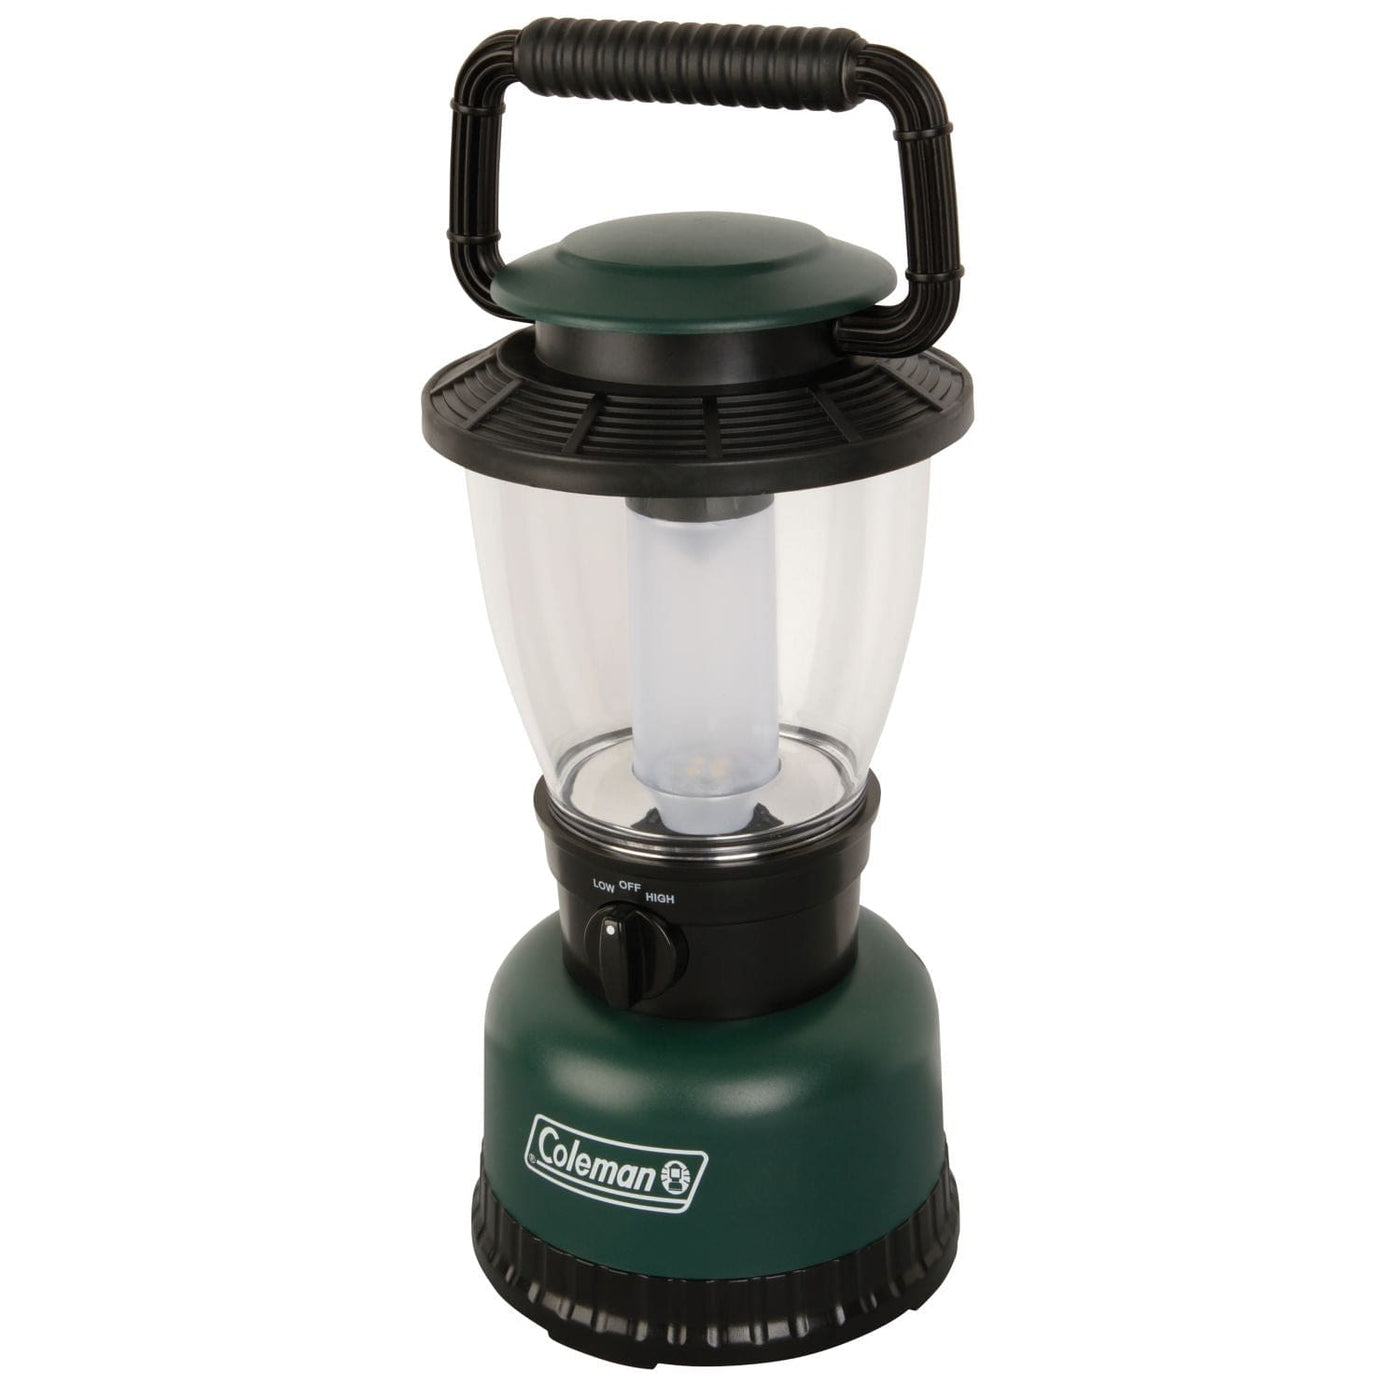 Coleman Coleman Rugged CPX 6 Personal Size LED Lantern Green Camping And Outdoor